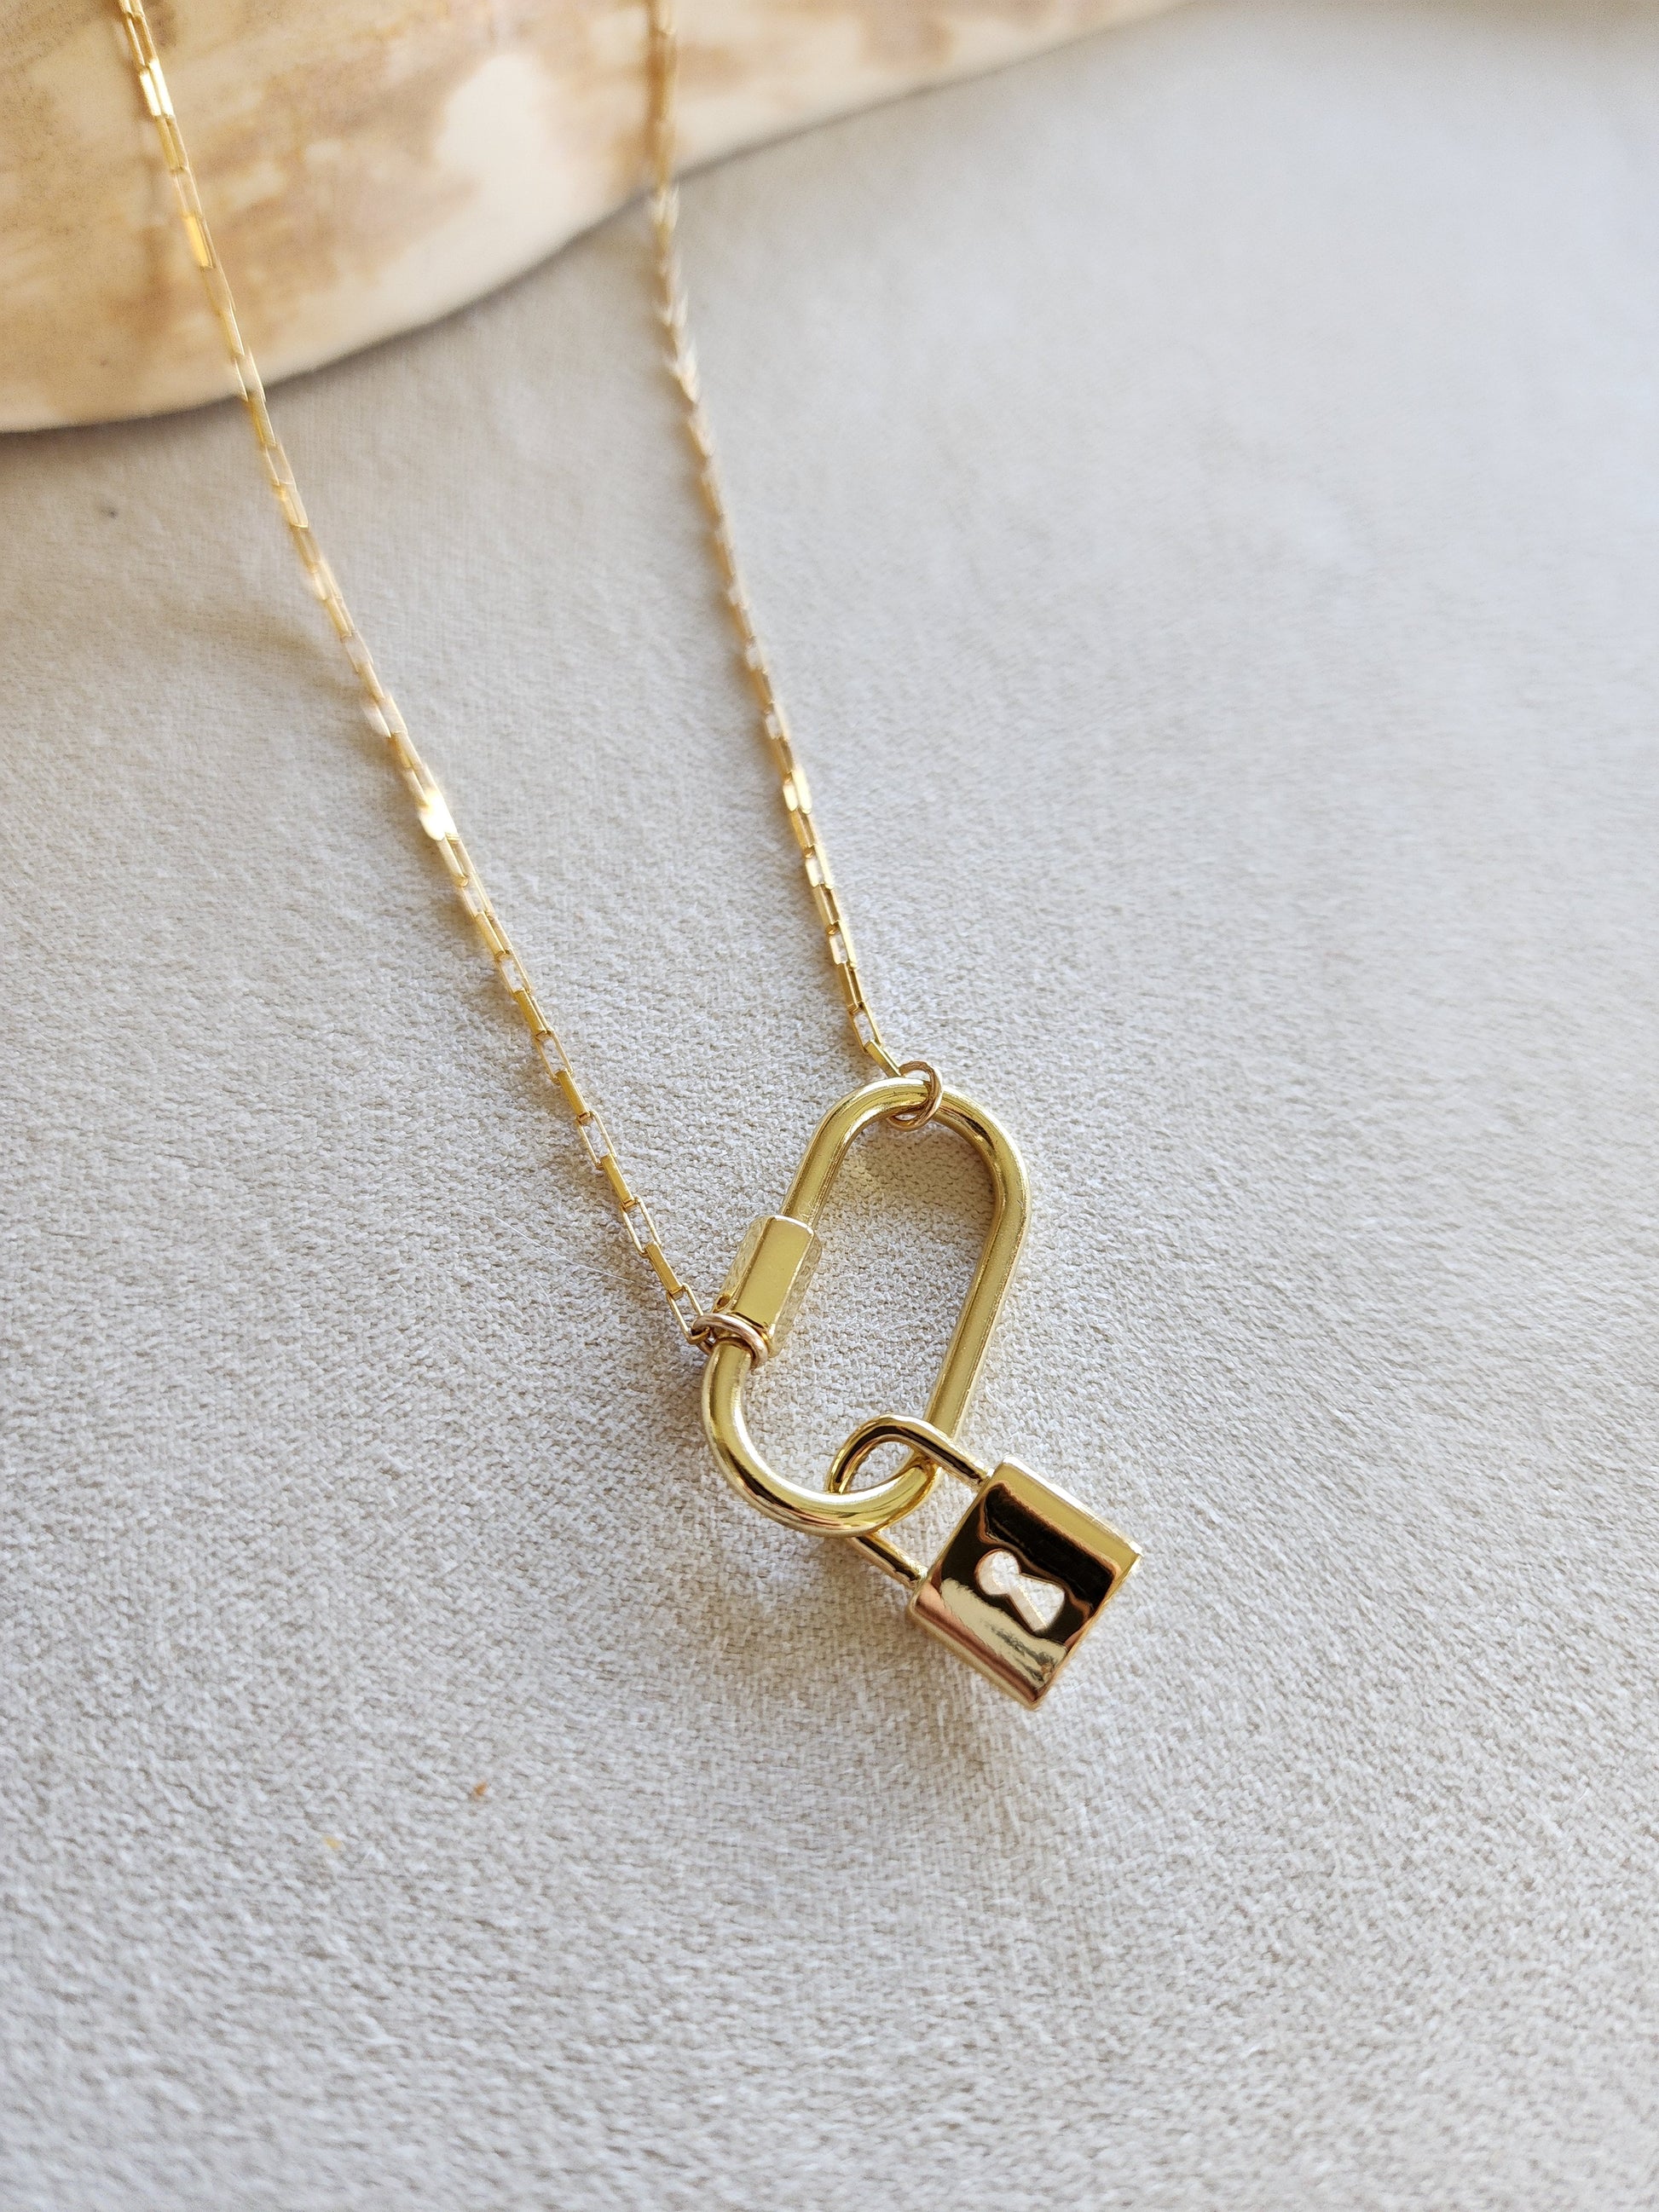 14K Gold Filled Lock Necklace 18 Inches